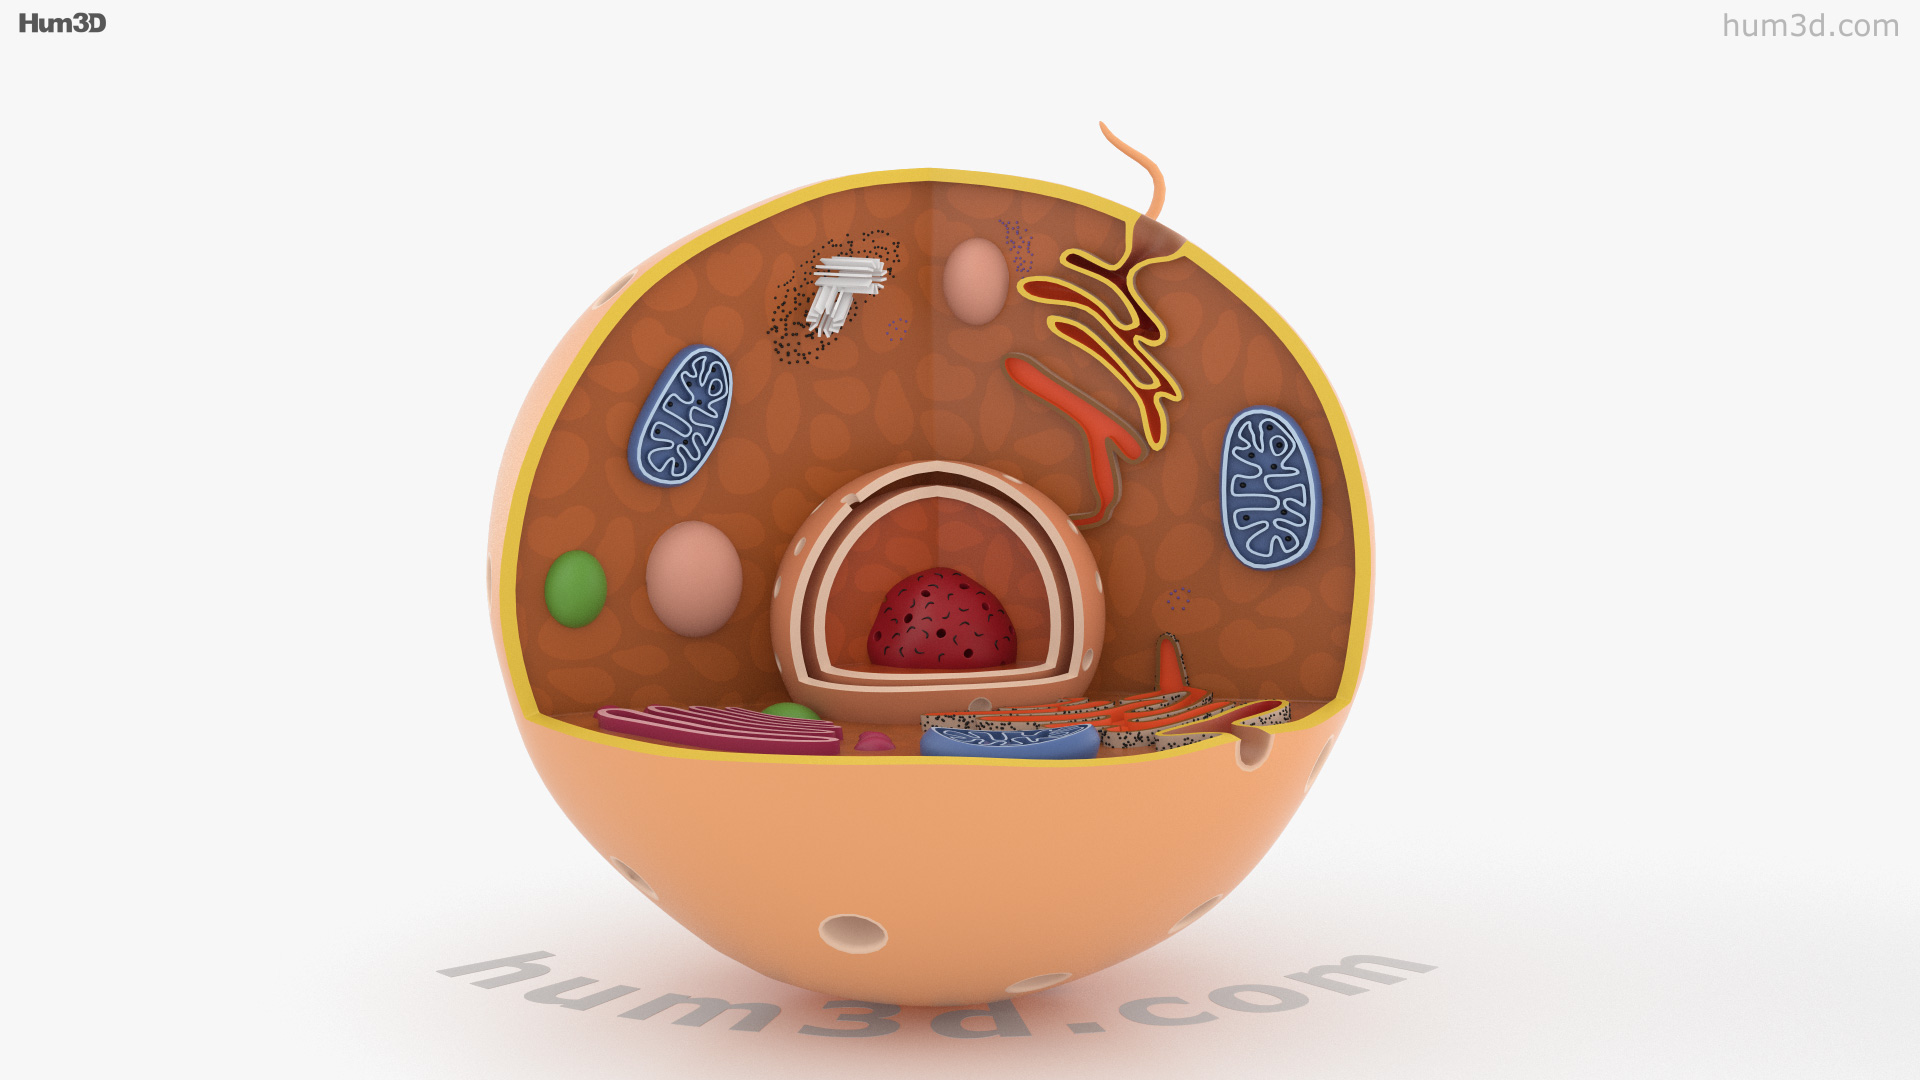 360 view of Animal Cell 3D model - Hum3D store